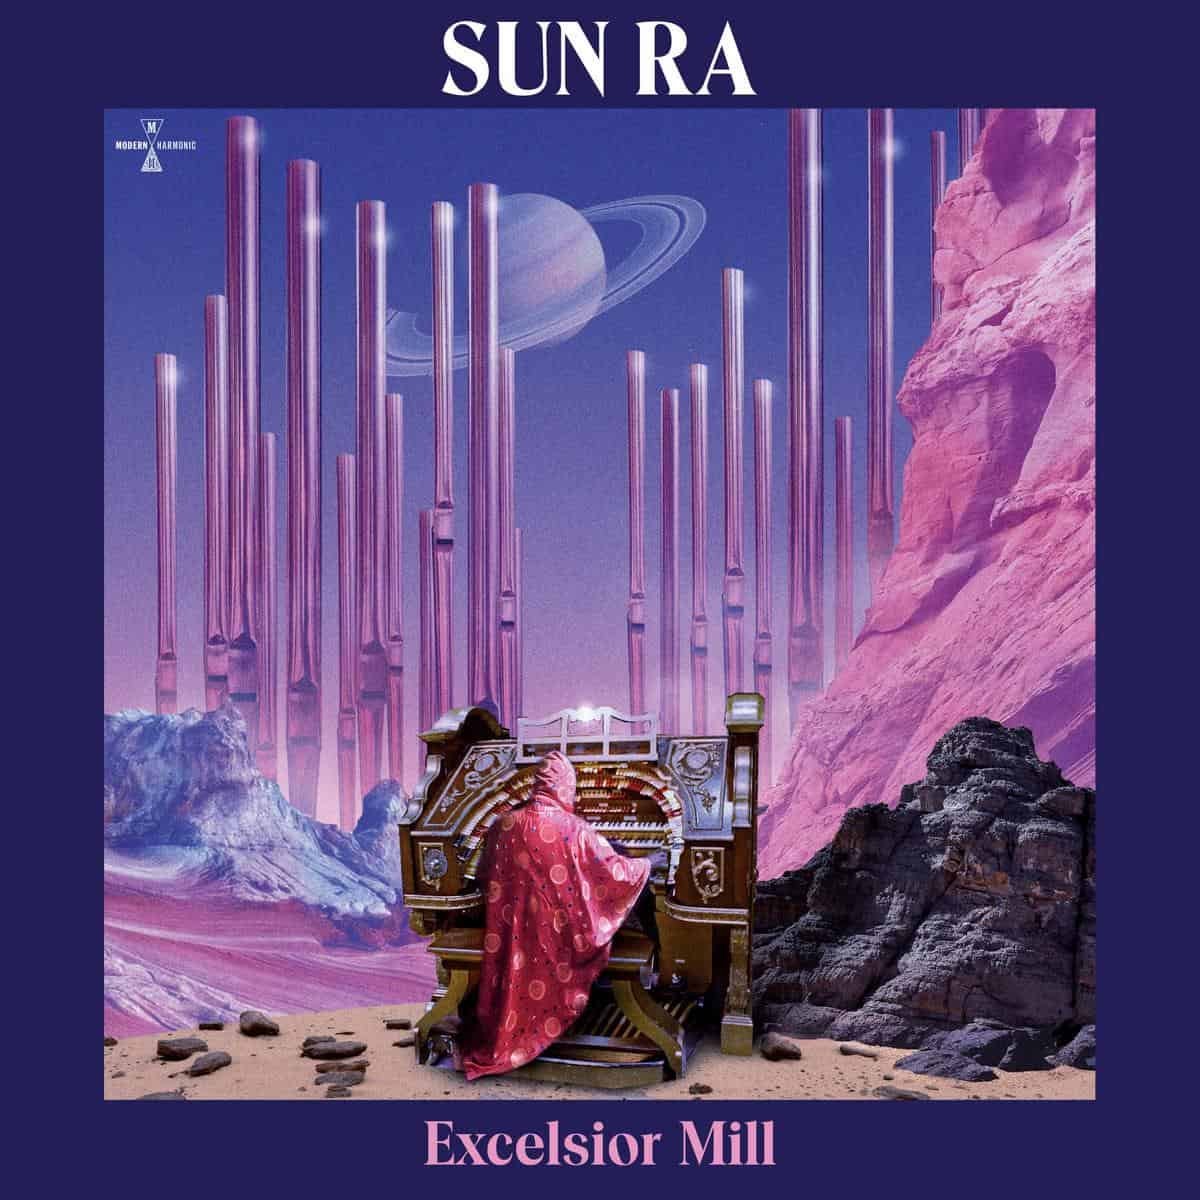 JUST IN! 'Excelsior Mill' by Sun Ra Jazz musician Sun Ra swapped the brass for a pipe organ on this symphonic-sounding cosmic mind-bender. @ModernHarmonic normanrecords.com/records/203075…